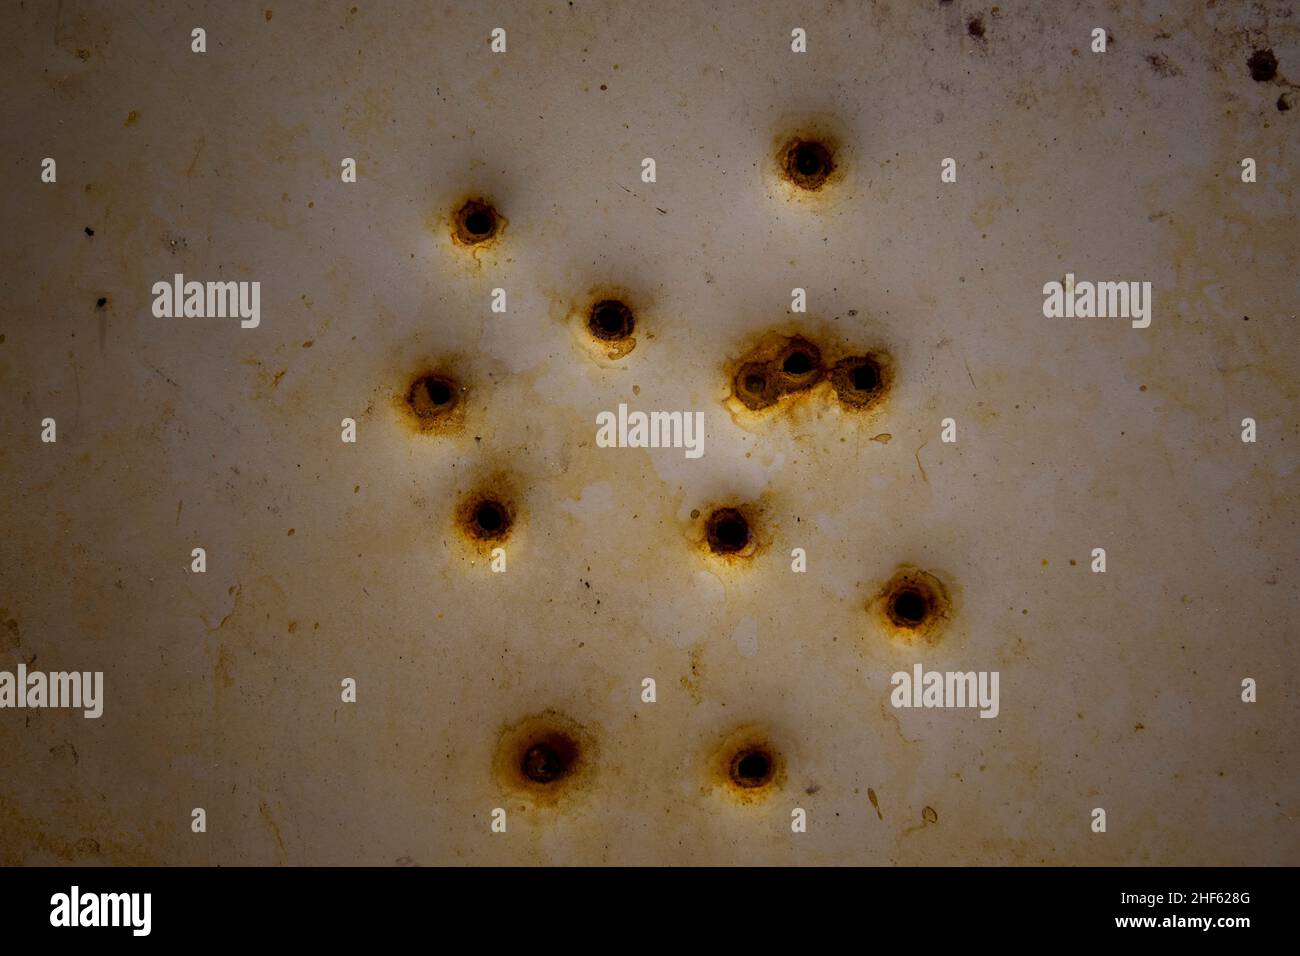 Rusty bullet holes in a metal plate. Stock Photo